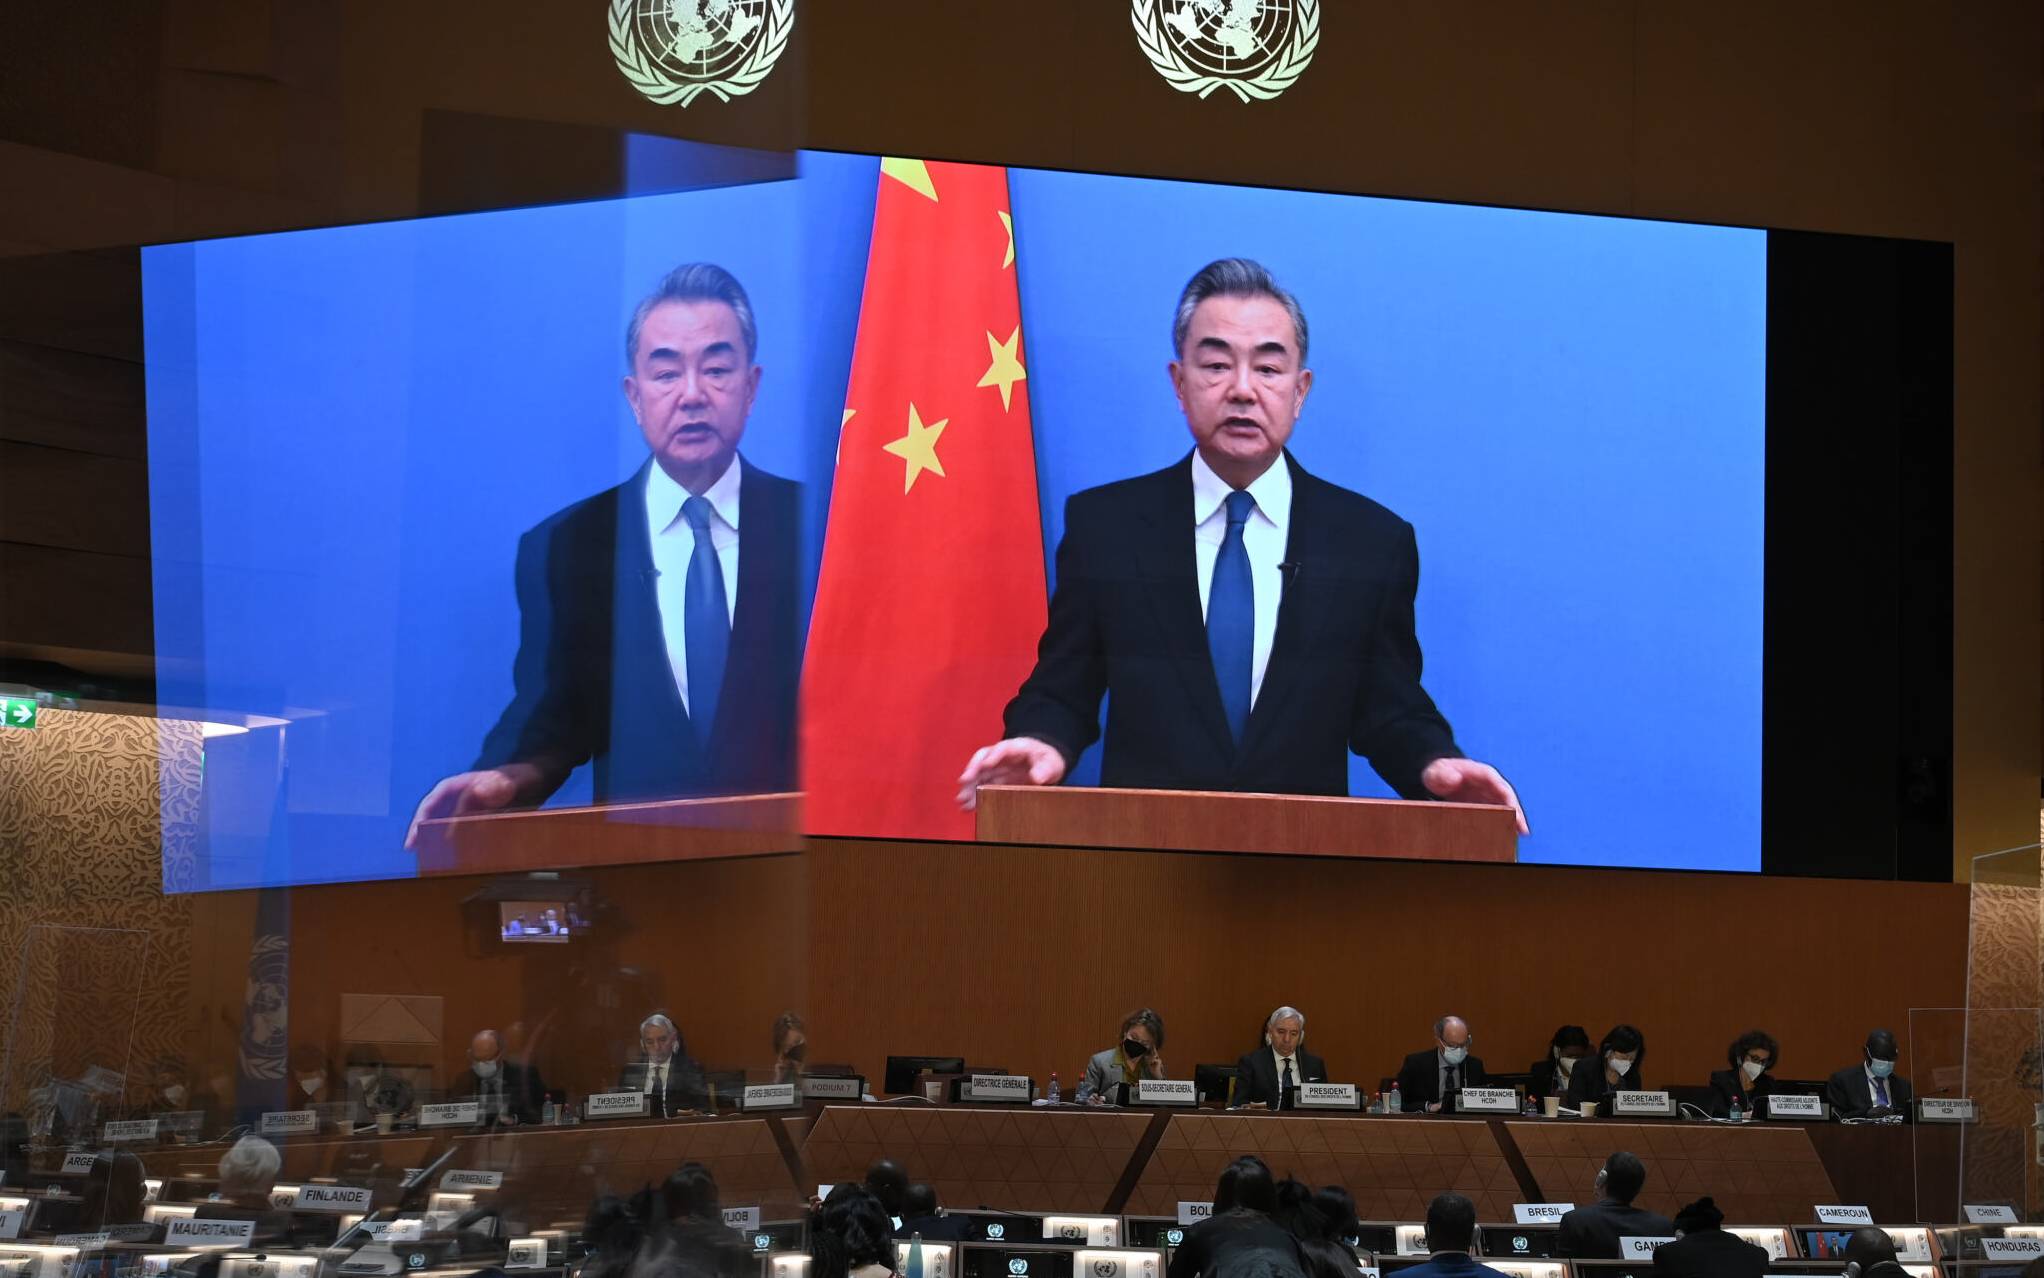 Chinese Foreign minister Wang Yi appears on a screen as he delivers a remote speech at the opening of a session of the UN Human Rights Council, following the Russian invasion in Ukraine, in Geneva, on February 28, 2022. - The UN Human Rights Council voted to hold an urgent debate about Russia's deadly invasion of Ukraine at Kyiv's request, amid widespread international condemnation of Moscow's attack. (Photo by Fabrice COFFRINI / AFP)